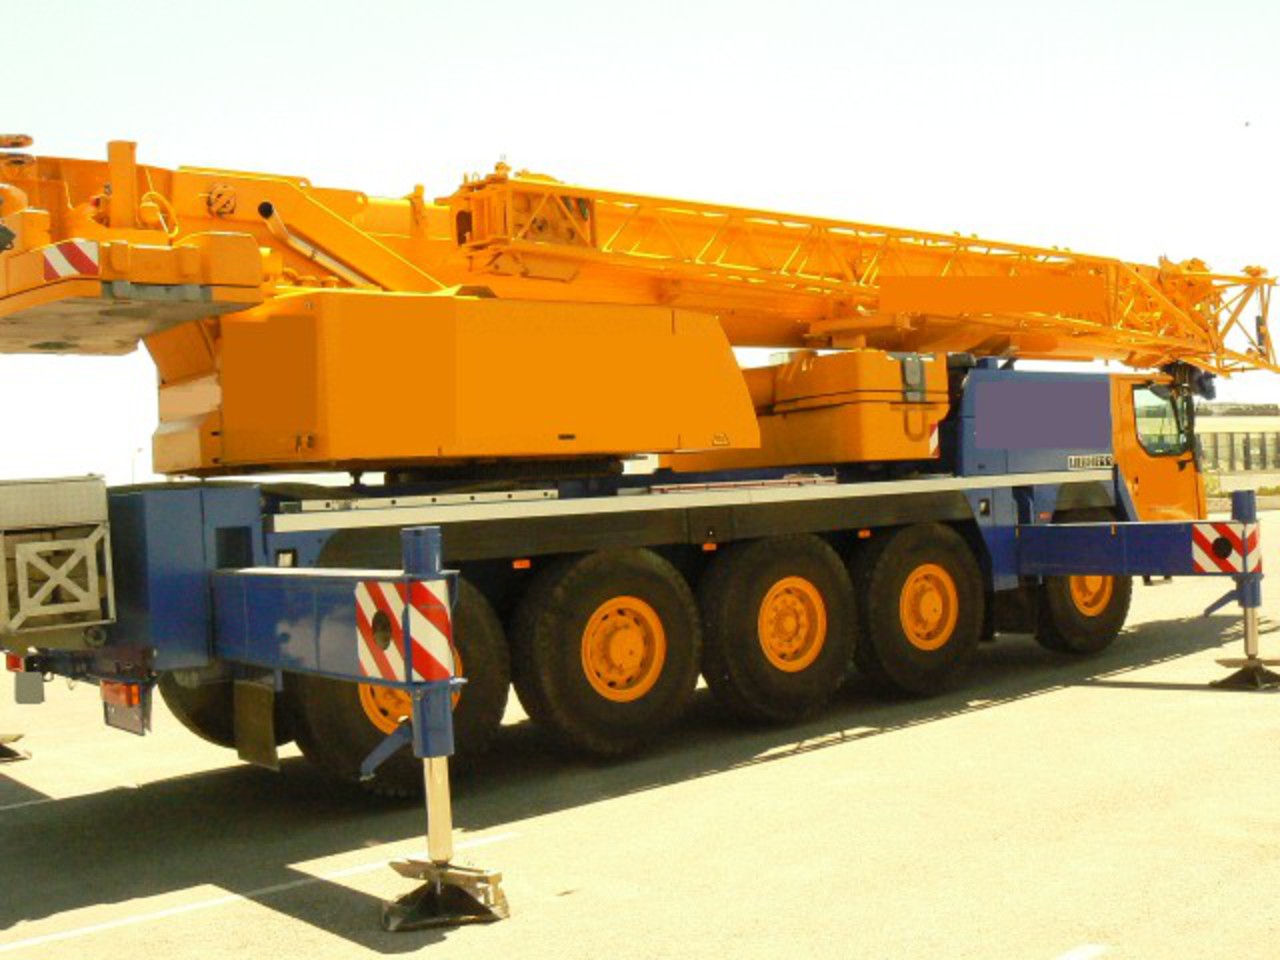 Liebherr LTM 1095-5.1 Photo Gallery: Photo #10 out of 8, Image ...